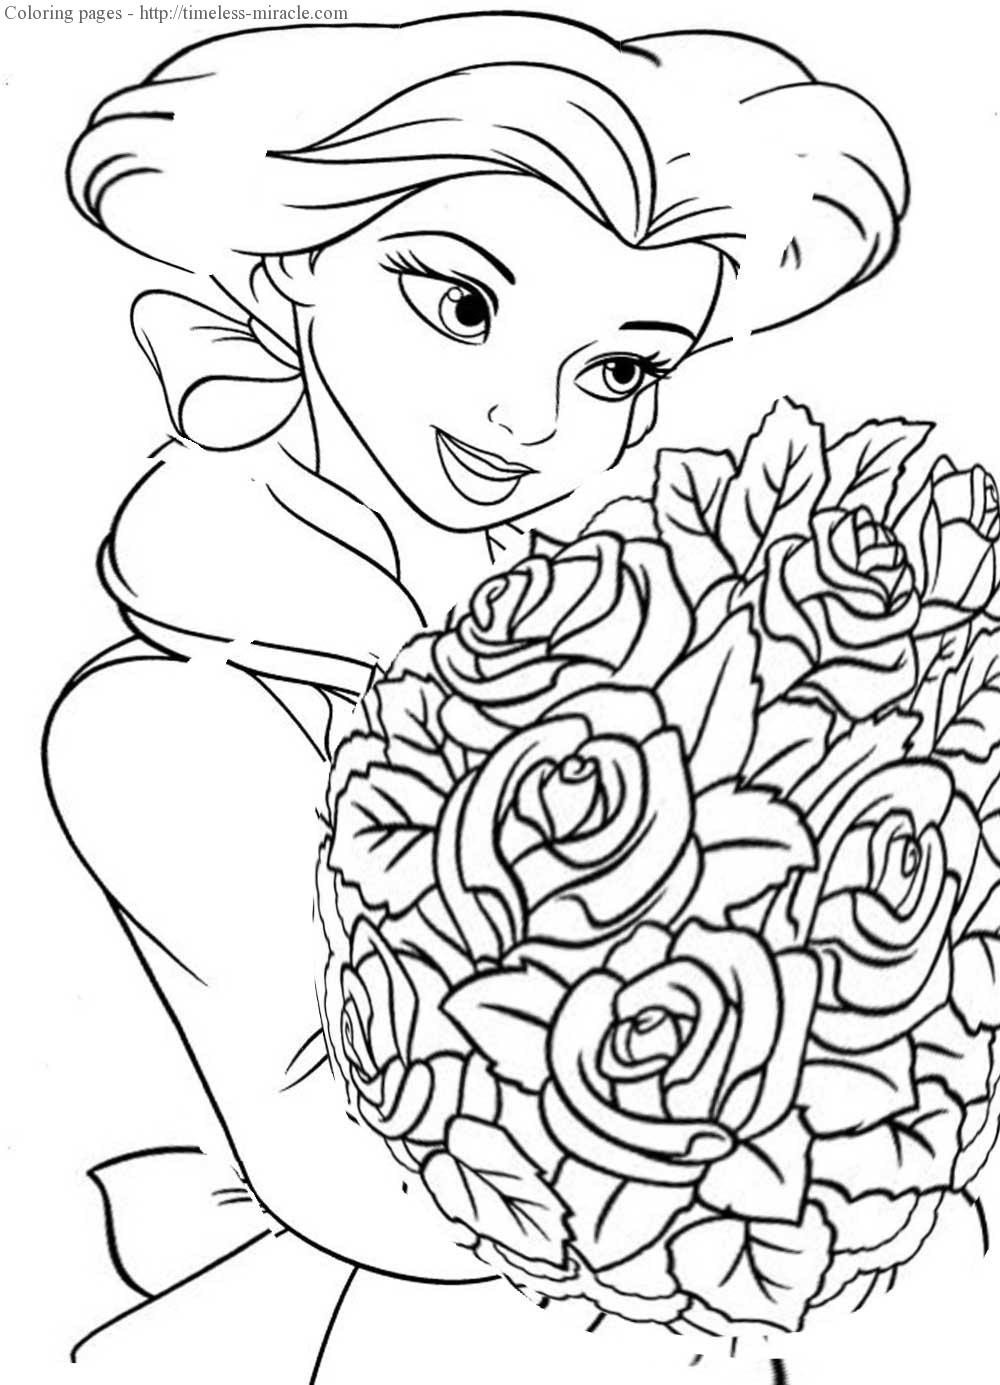 Coloring Pages Disney For Girls
 Disney coloring pages for girl timeless miracle